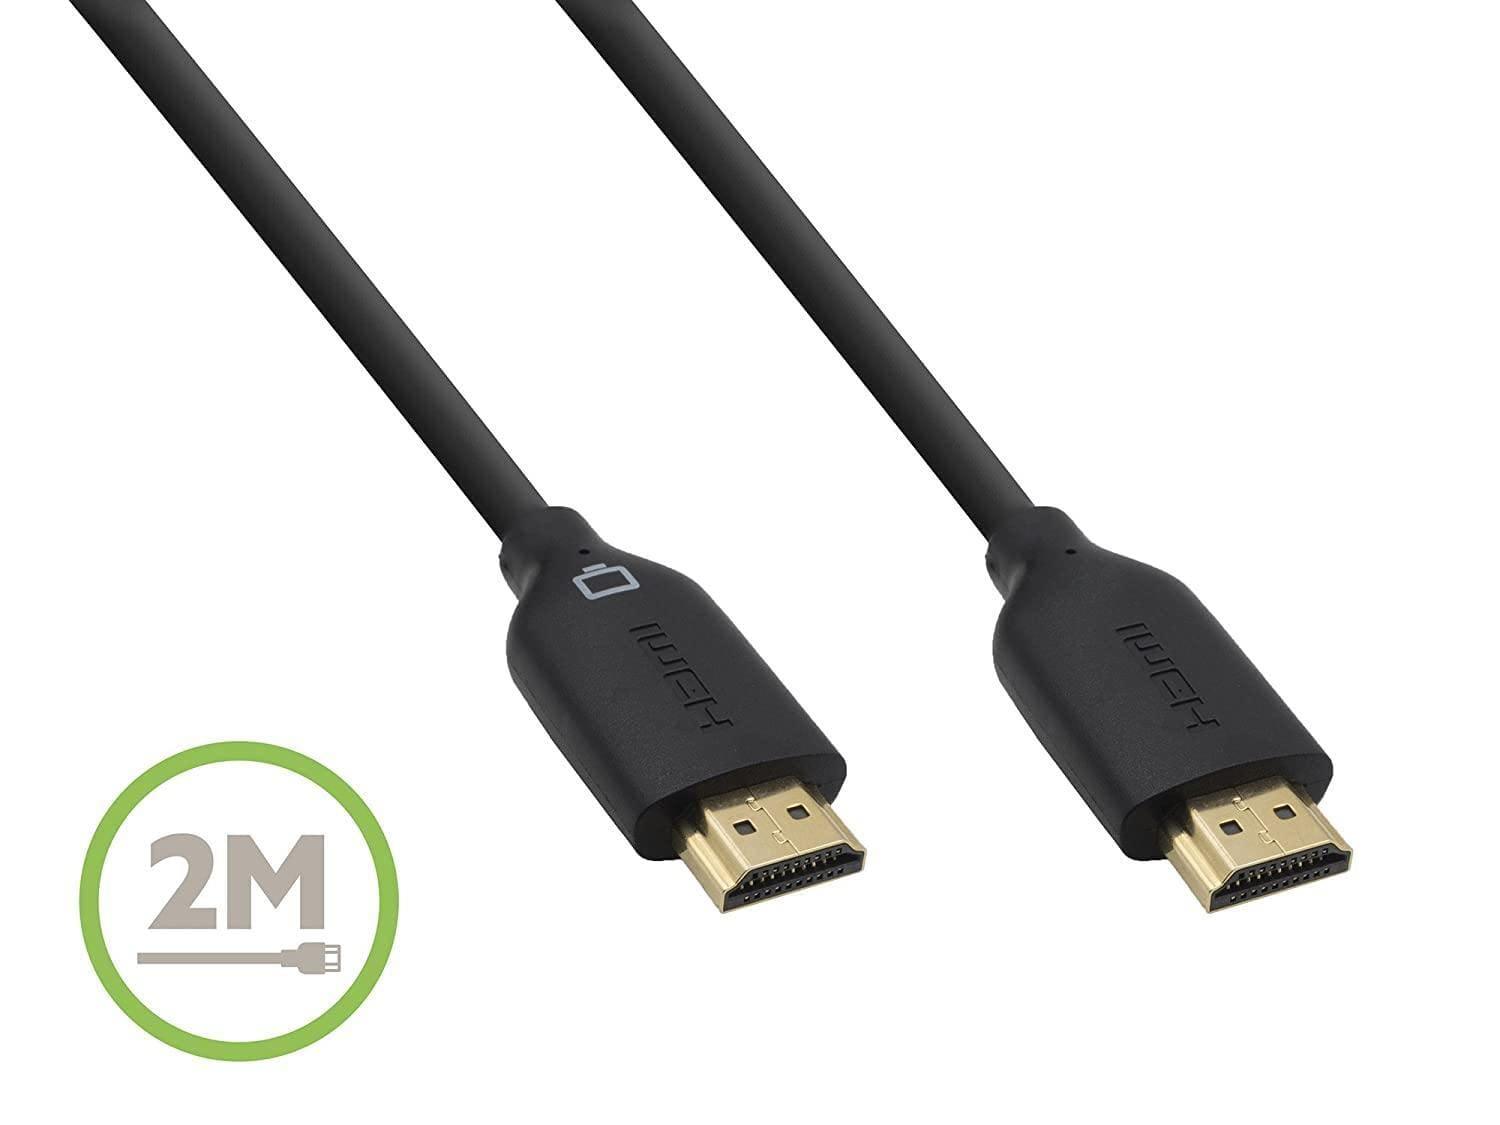 Belkin High Speed HDMI Cable Supports Ethernet 4K Gold Plated Audio Return Channel 2 meter-Cables-dealsplant